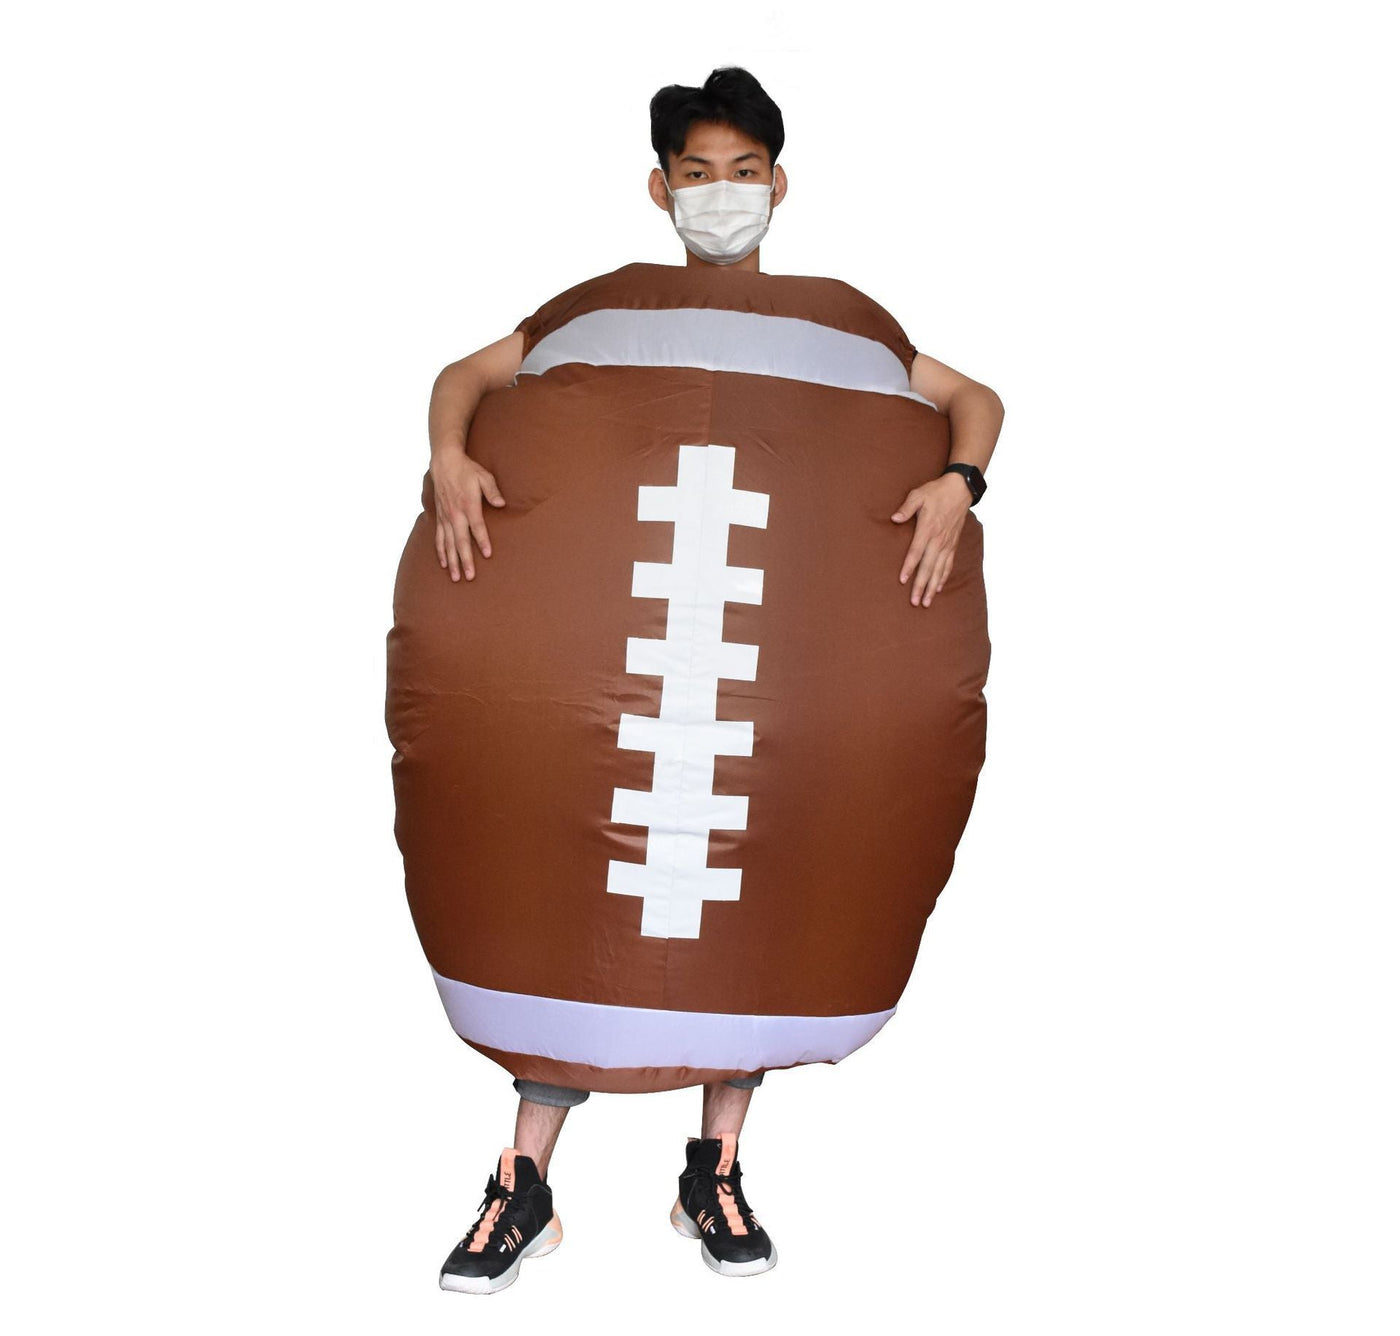 Fun Inflatable Football Suit